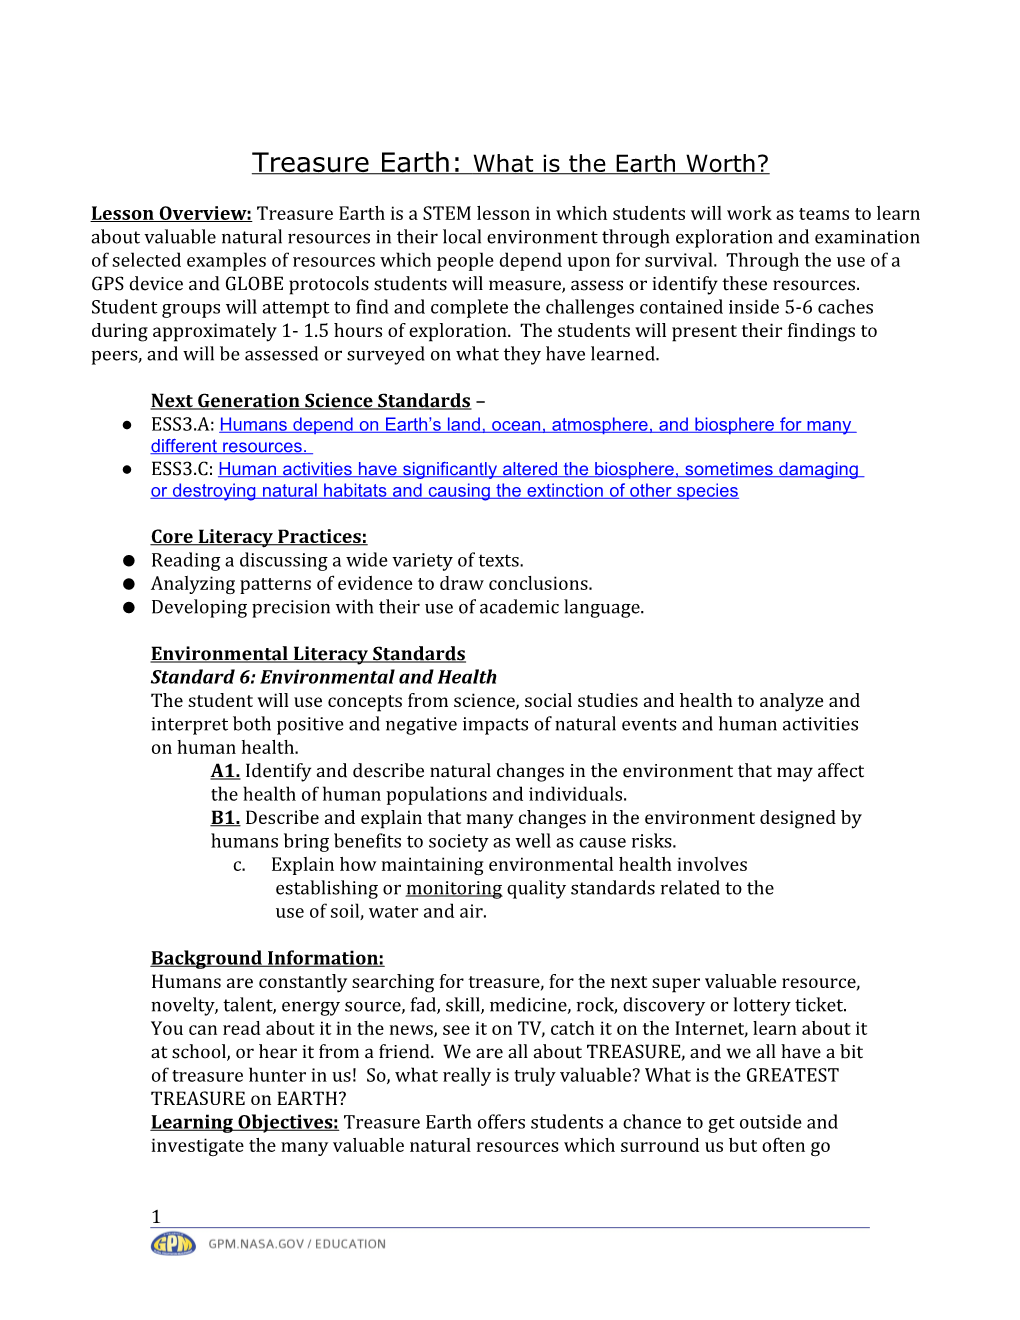 Treasure Earth: What Is the Earth Worth?